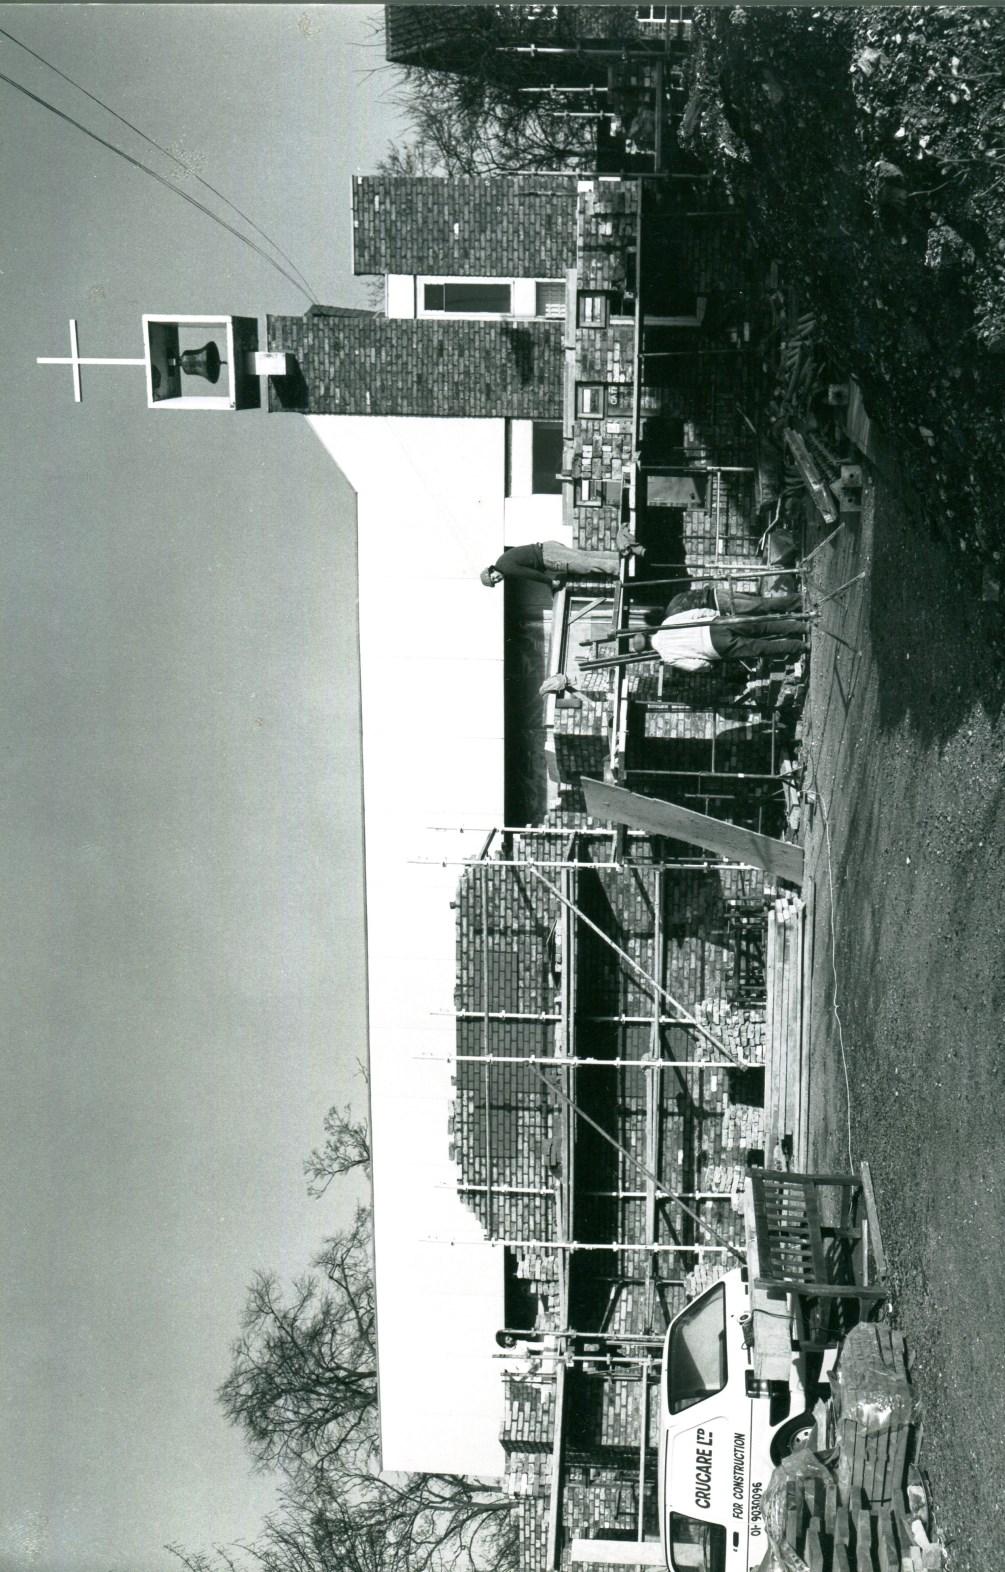 In 1983 a new sanctuary, altar